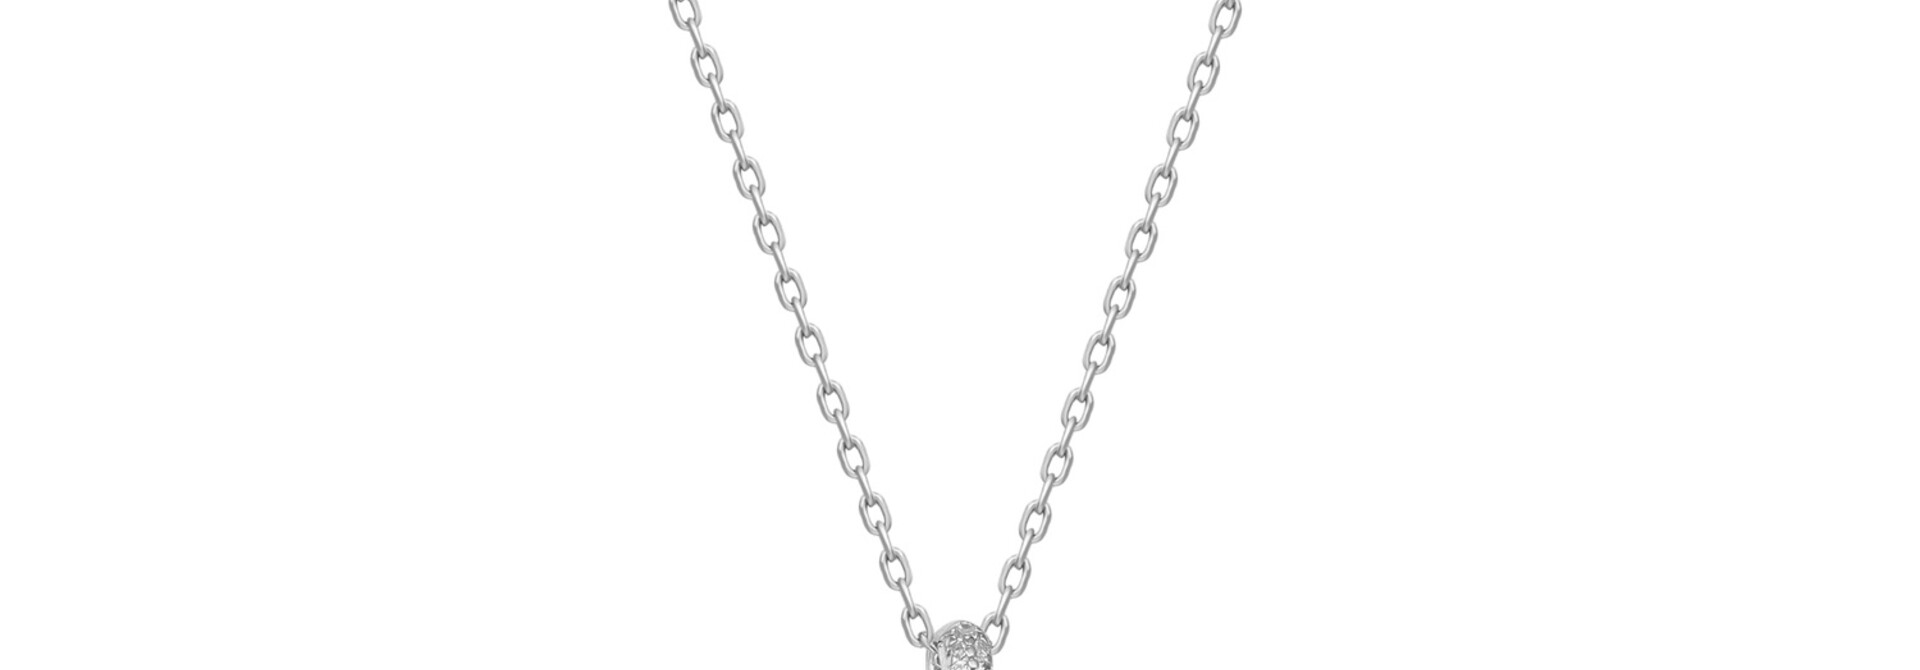 Silver Sparkle Point Medaillon Ketting - Zilver